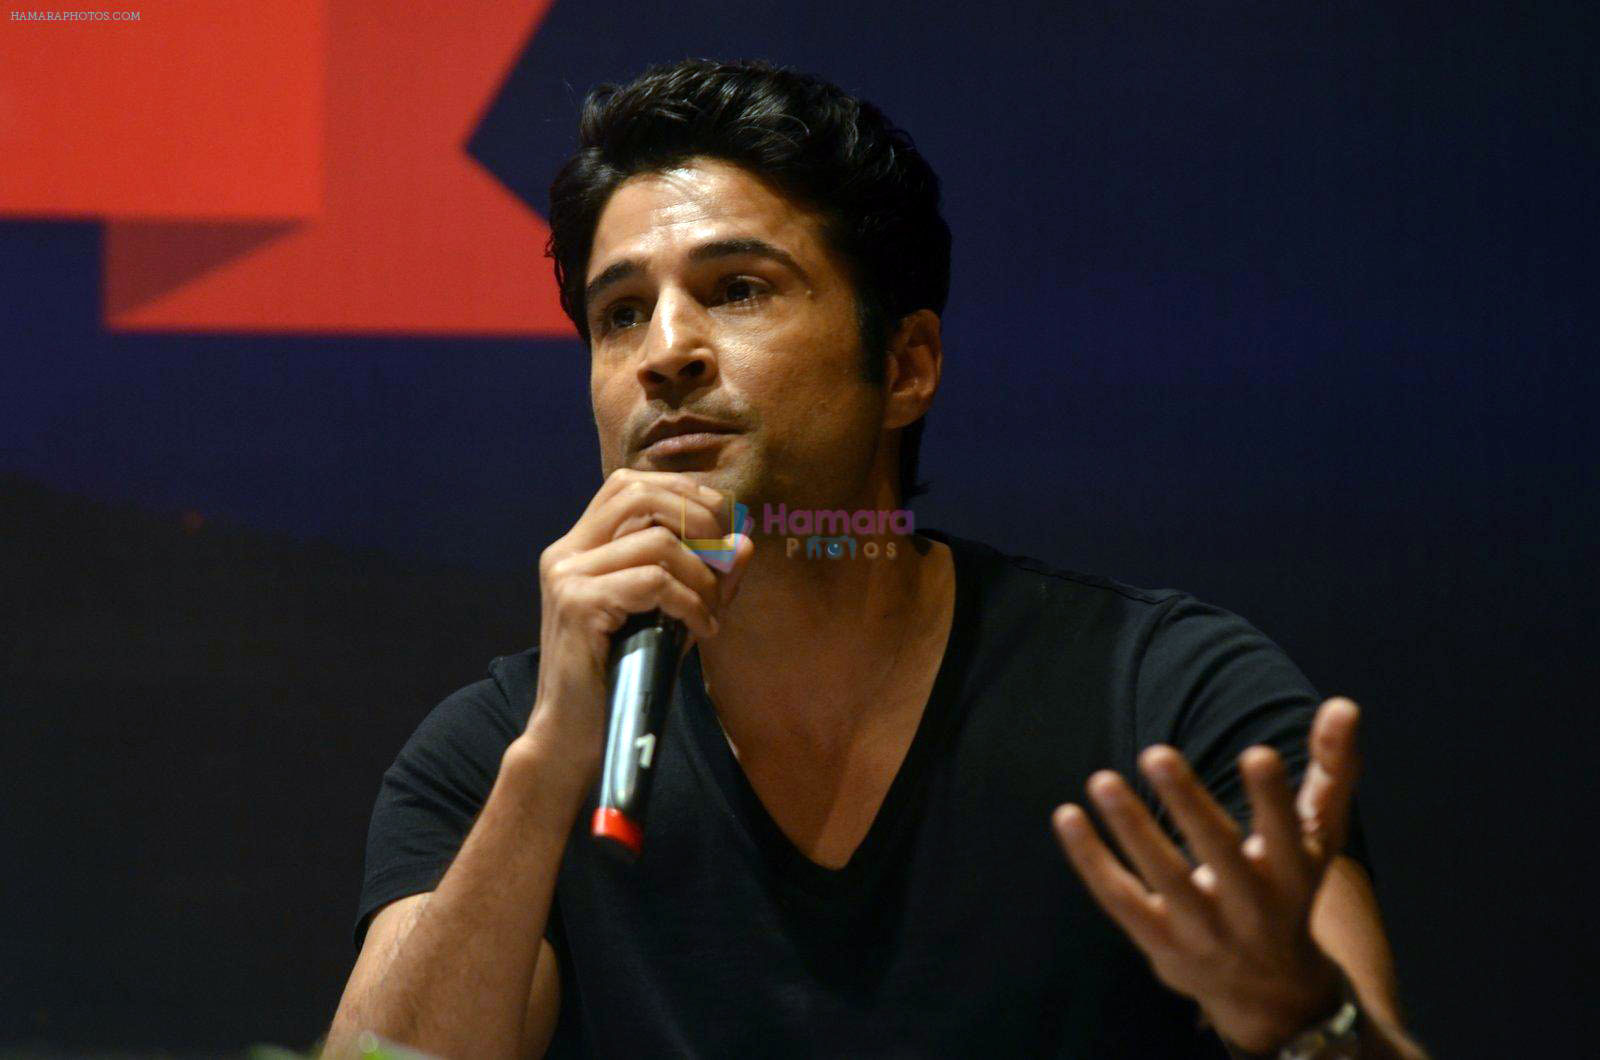 Rajeev Khandelwal during the launch of Young Bhartiya Foundation, an initiative by Ameya Pratap Singh in Mumbai, India on June 18, 2016